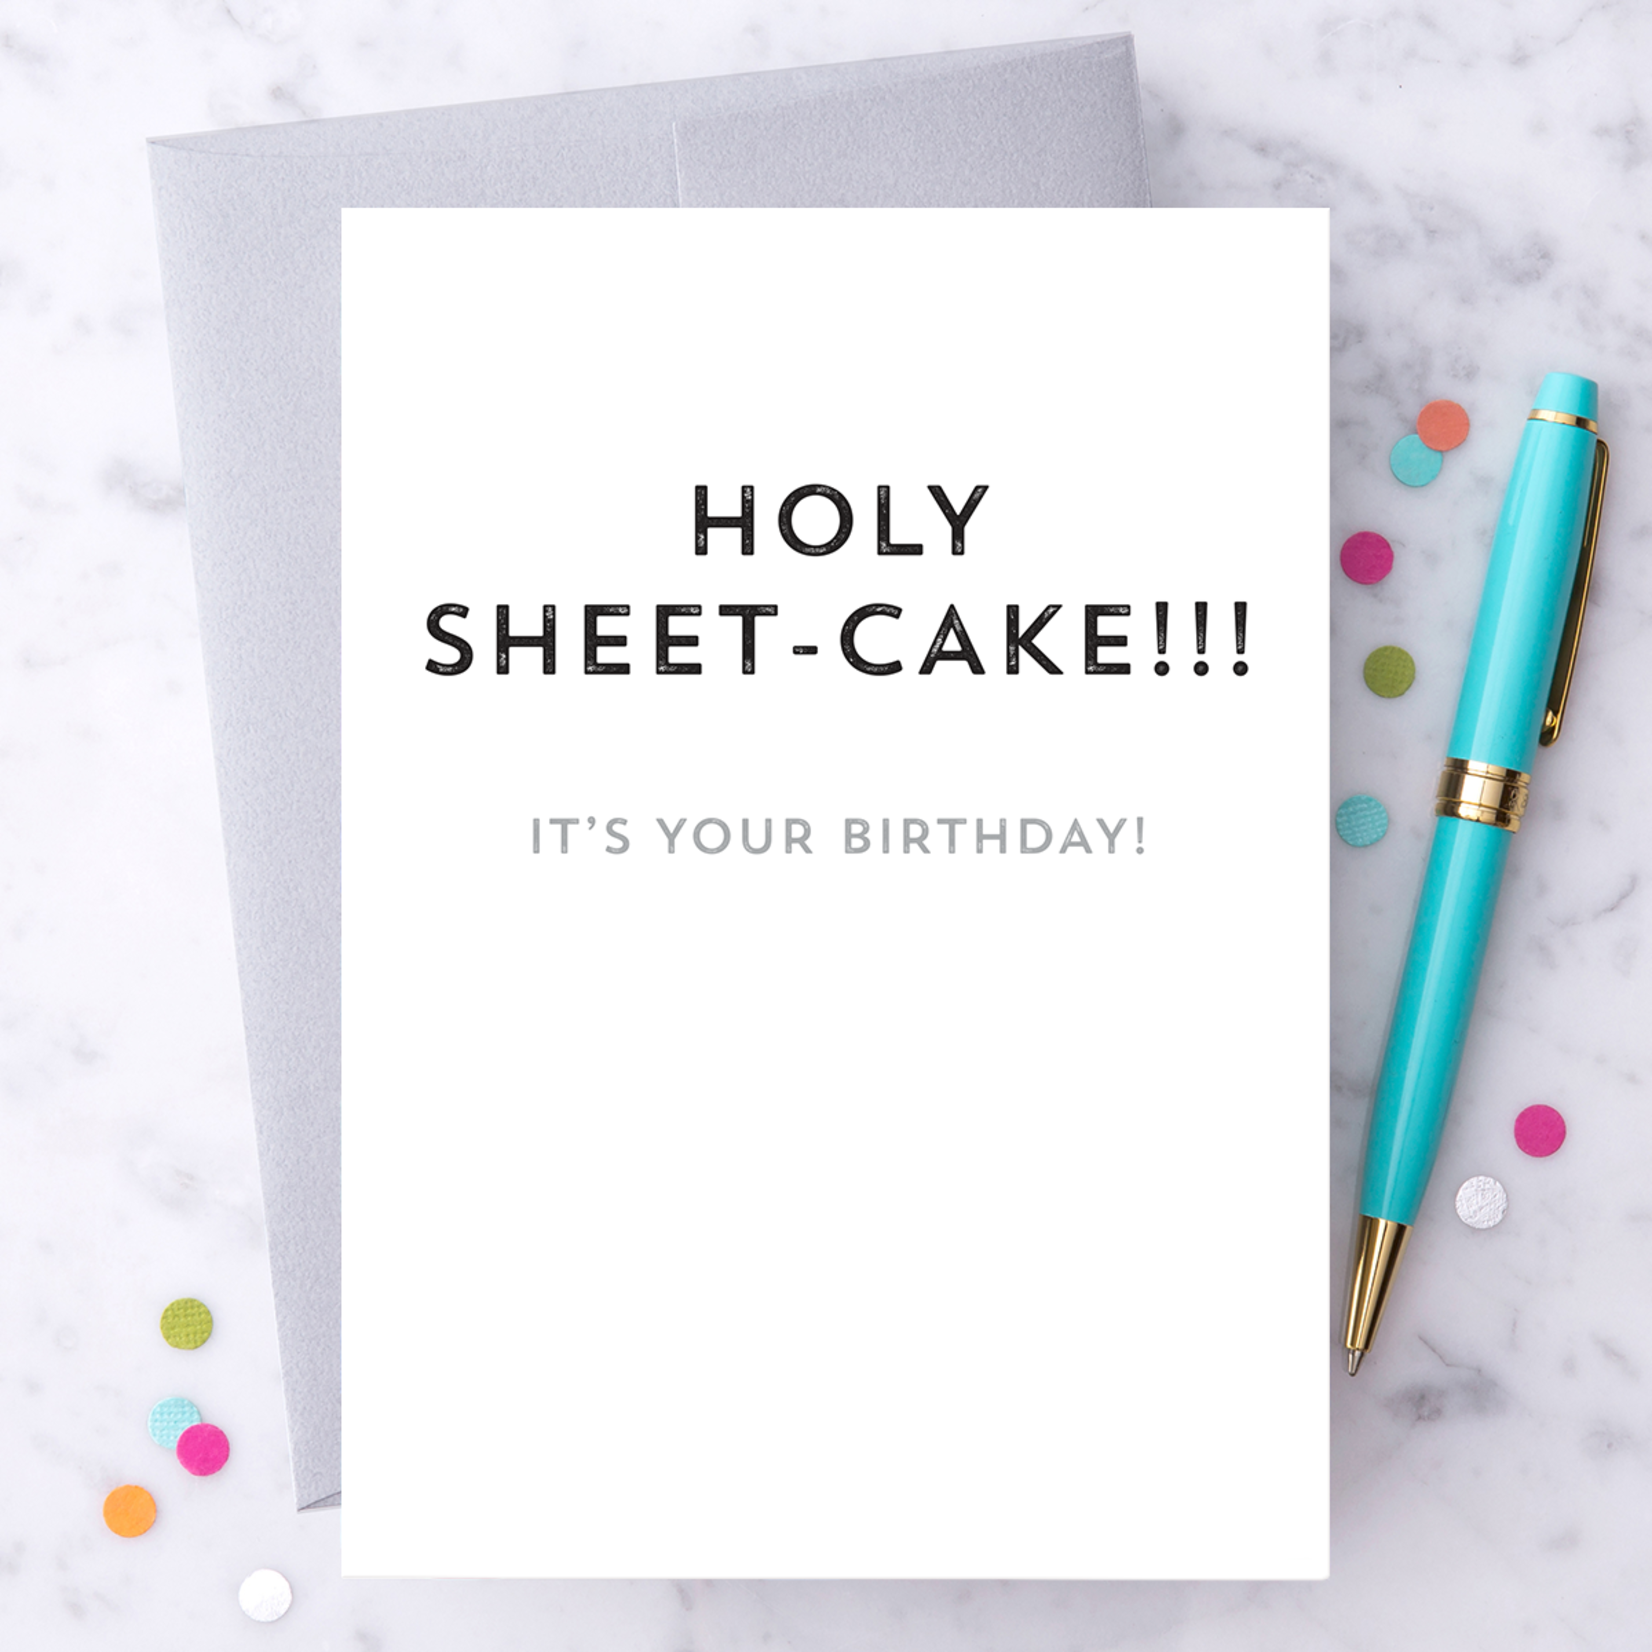 Design With Heart Holy Sheet-Cake! Birthday Card